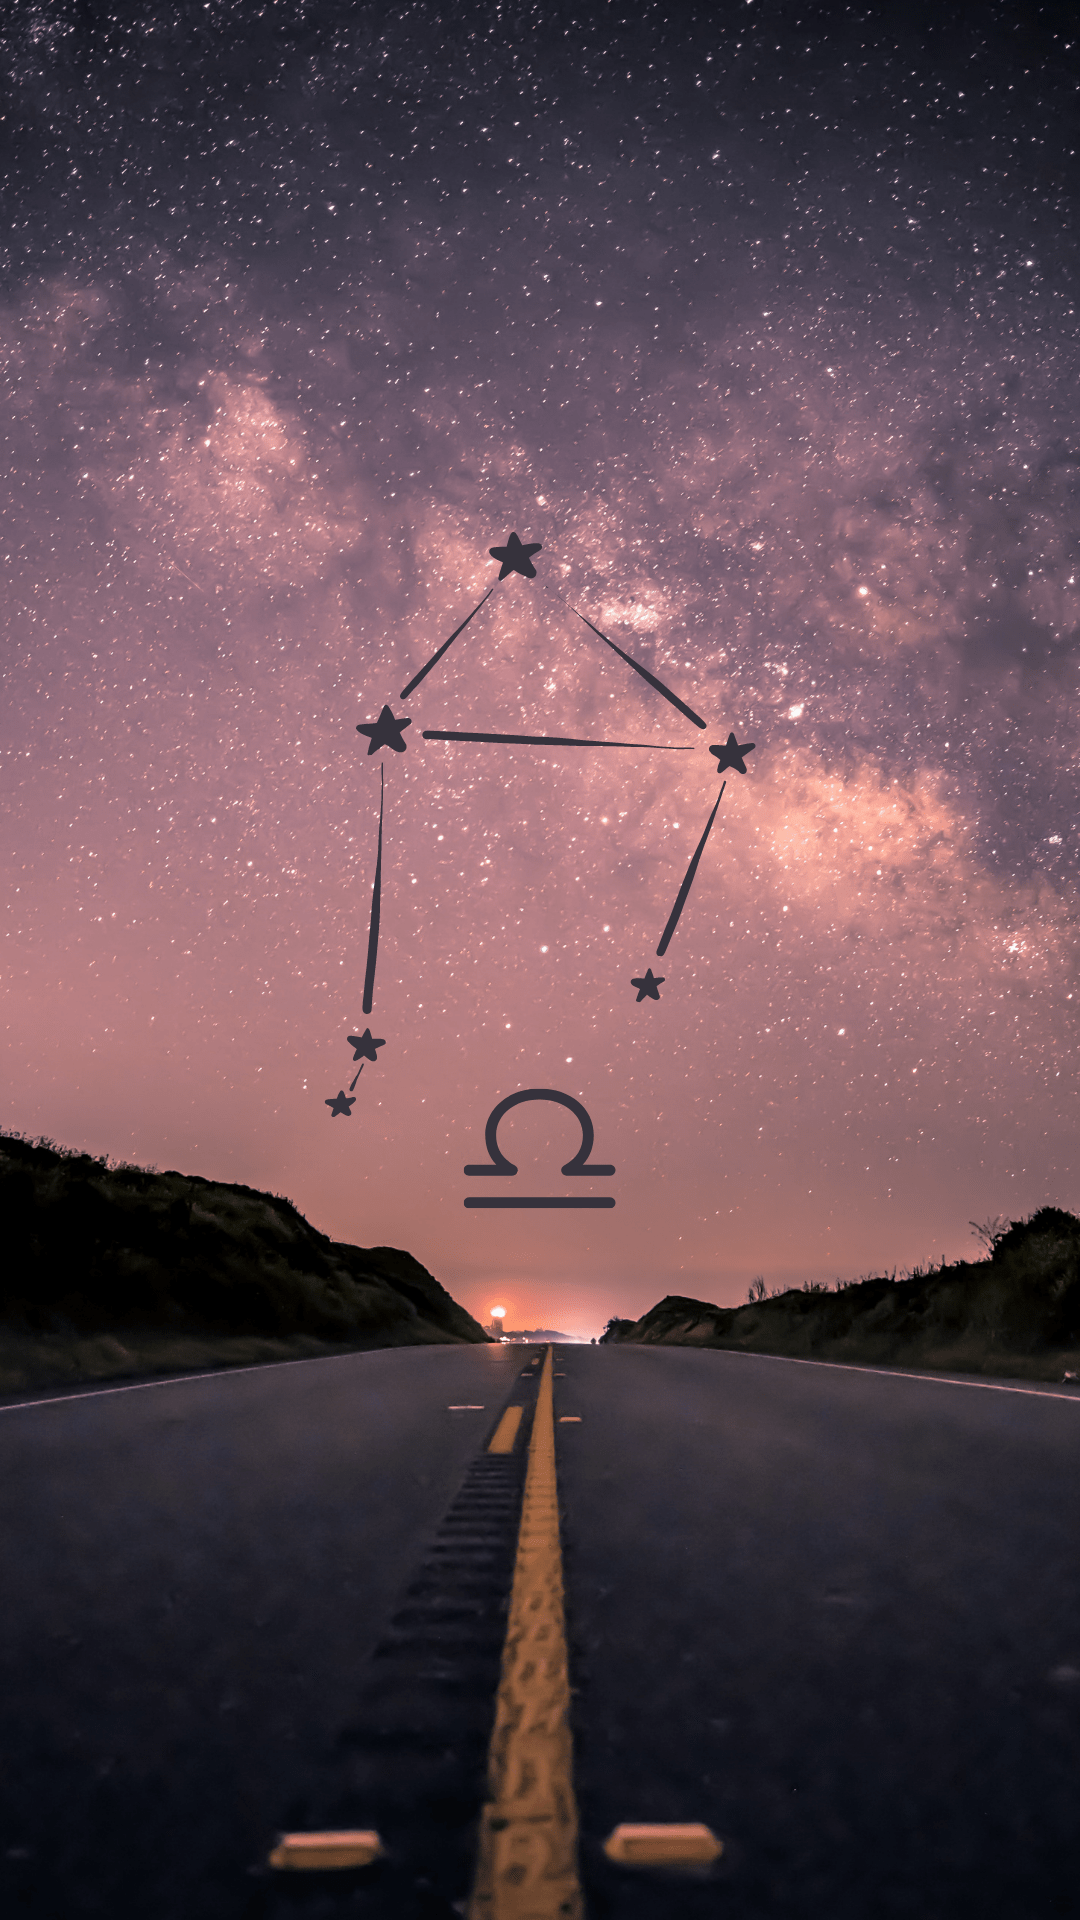 A road with stars in the sky - Libra